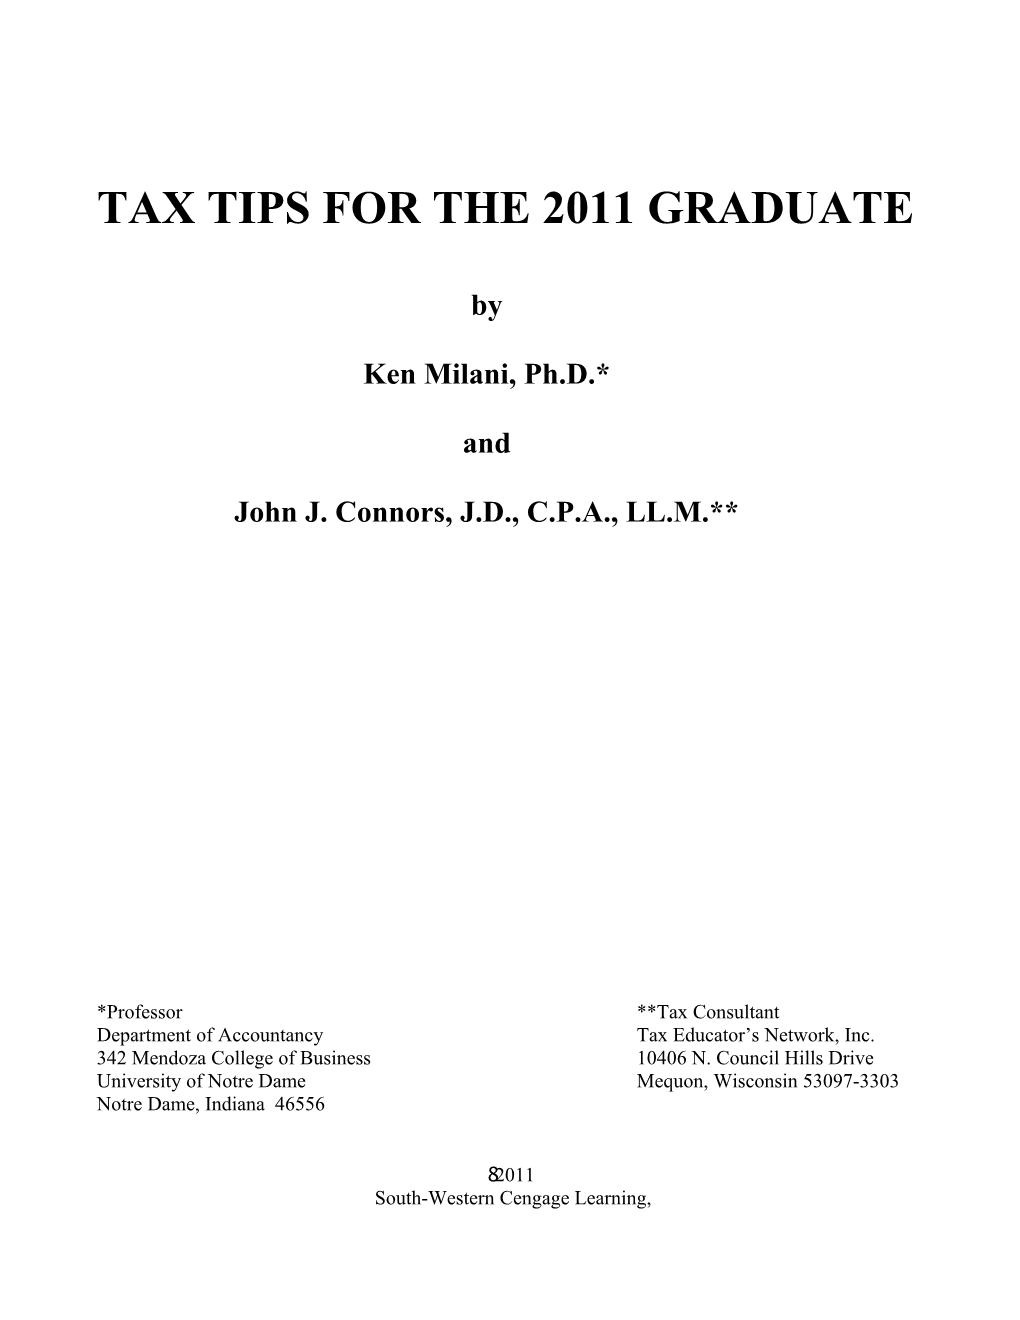 Tax Tips for the 2011 Graduate